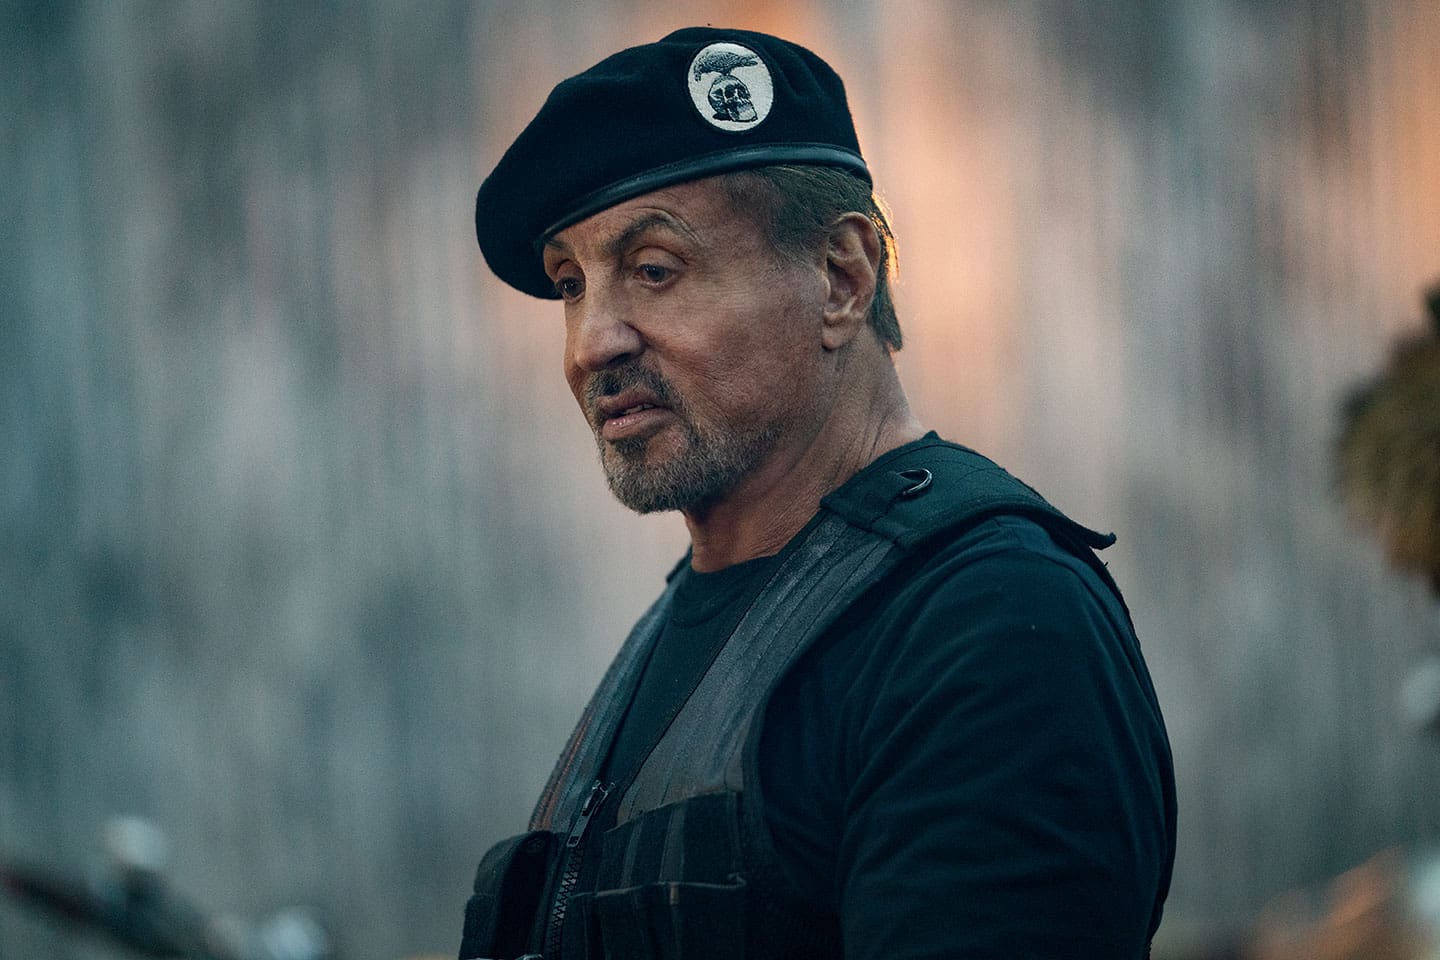 Sylvester Stallone in EXPEND4BLES.